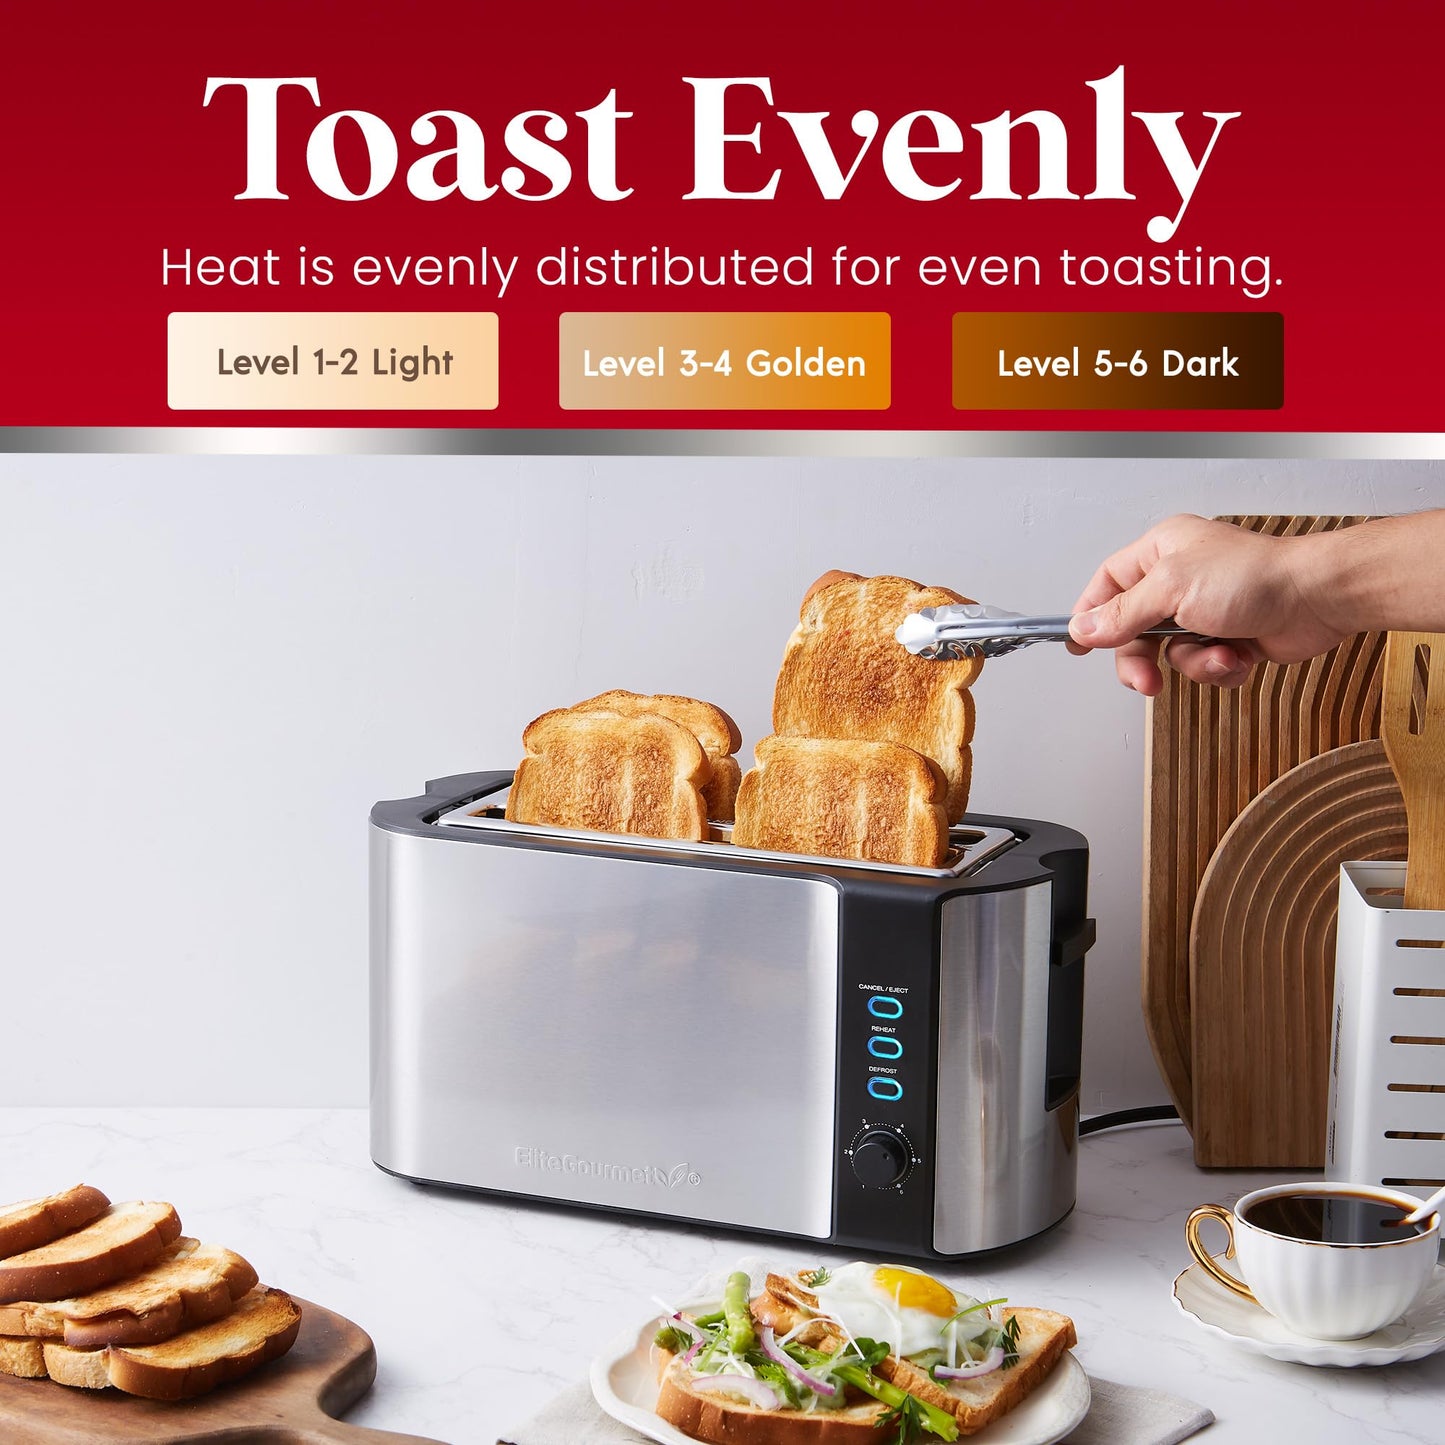 Elite Gourmet ECT-3100 Long Slot 4 Slice Toaster, Reheat, 6 Toast Settings, Defrost, Cancel Functions, Built-in Warming Rack, Extra Wide Slots for Bagels & Waffles, Stainless Steel & Black